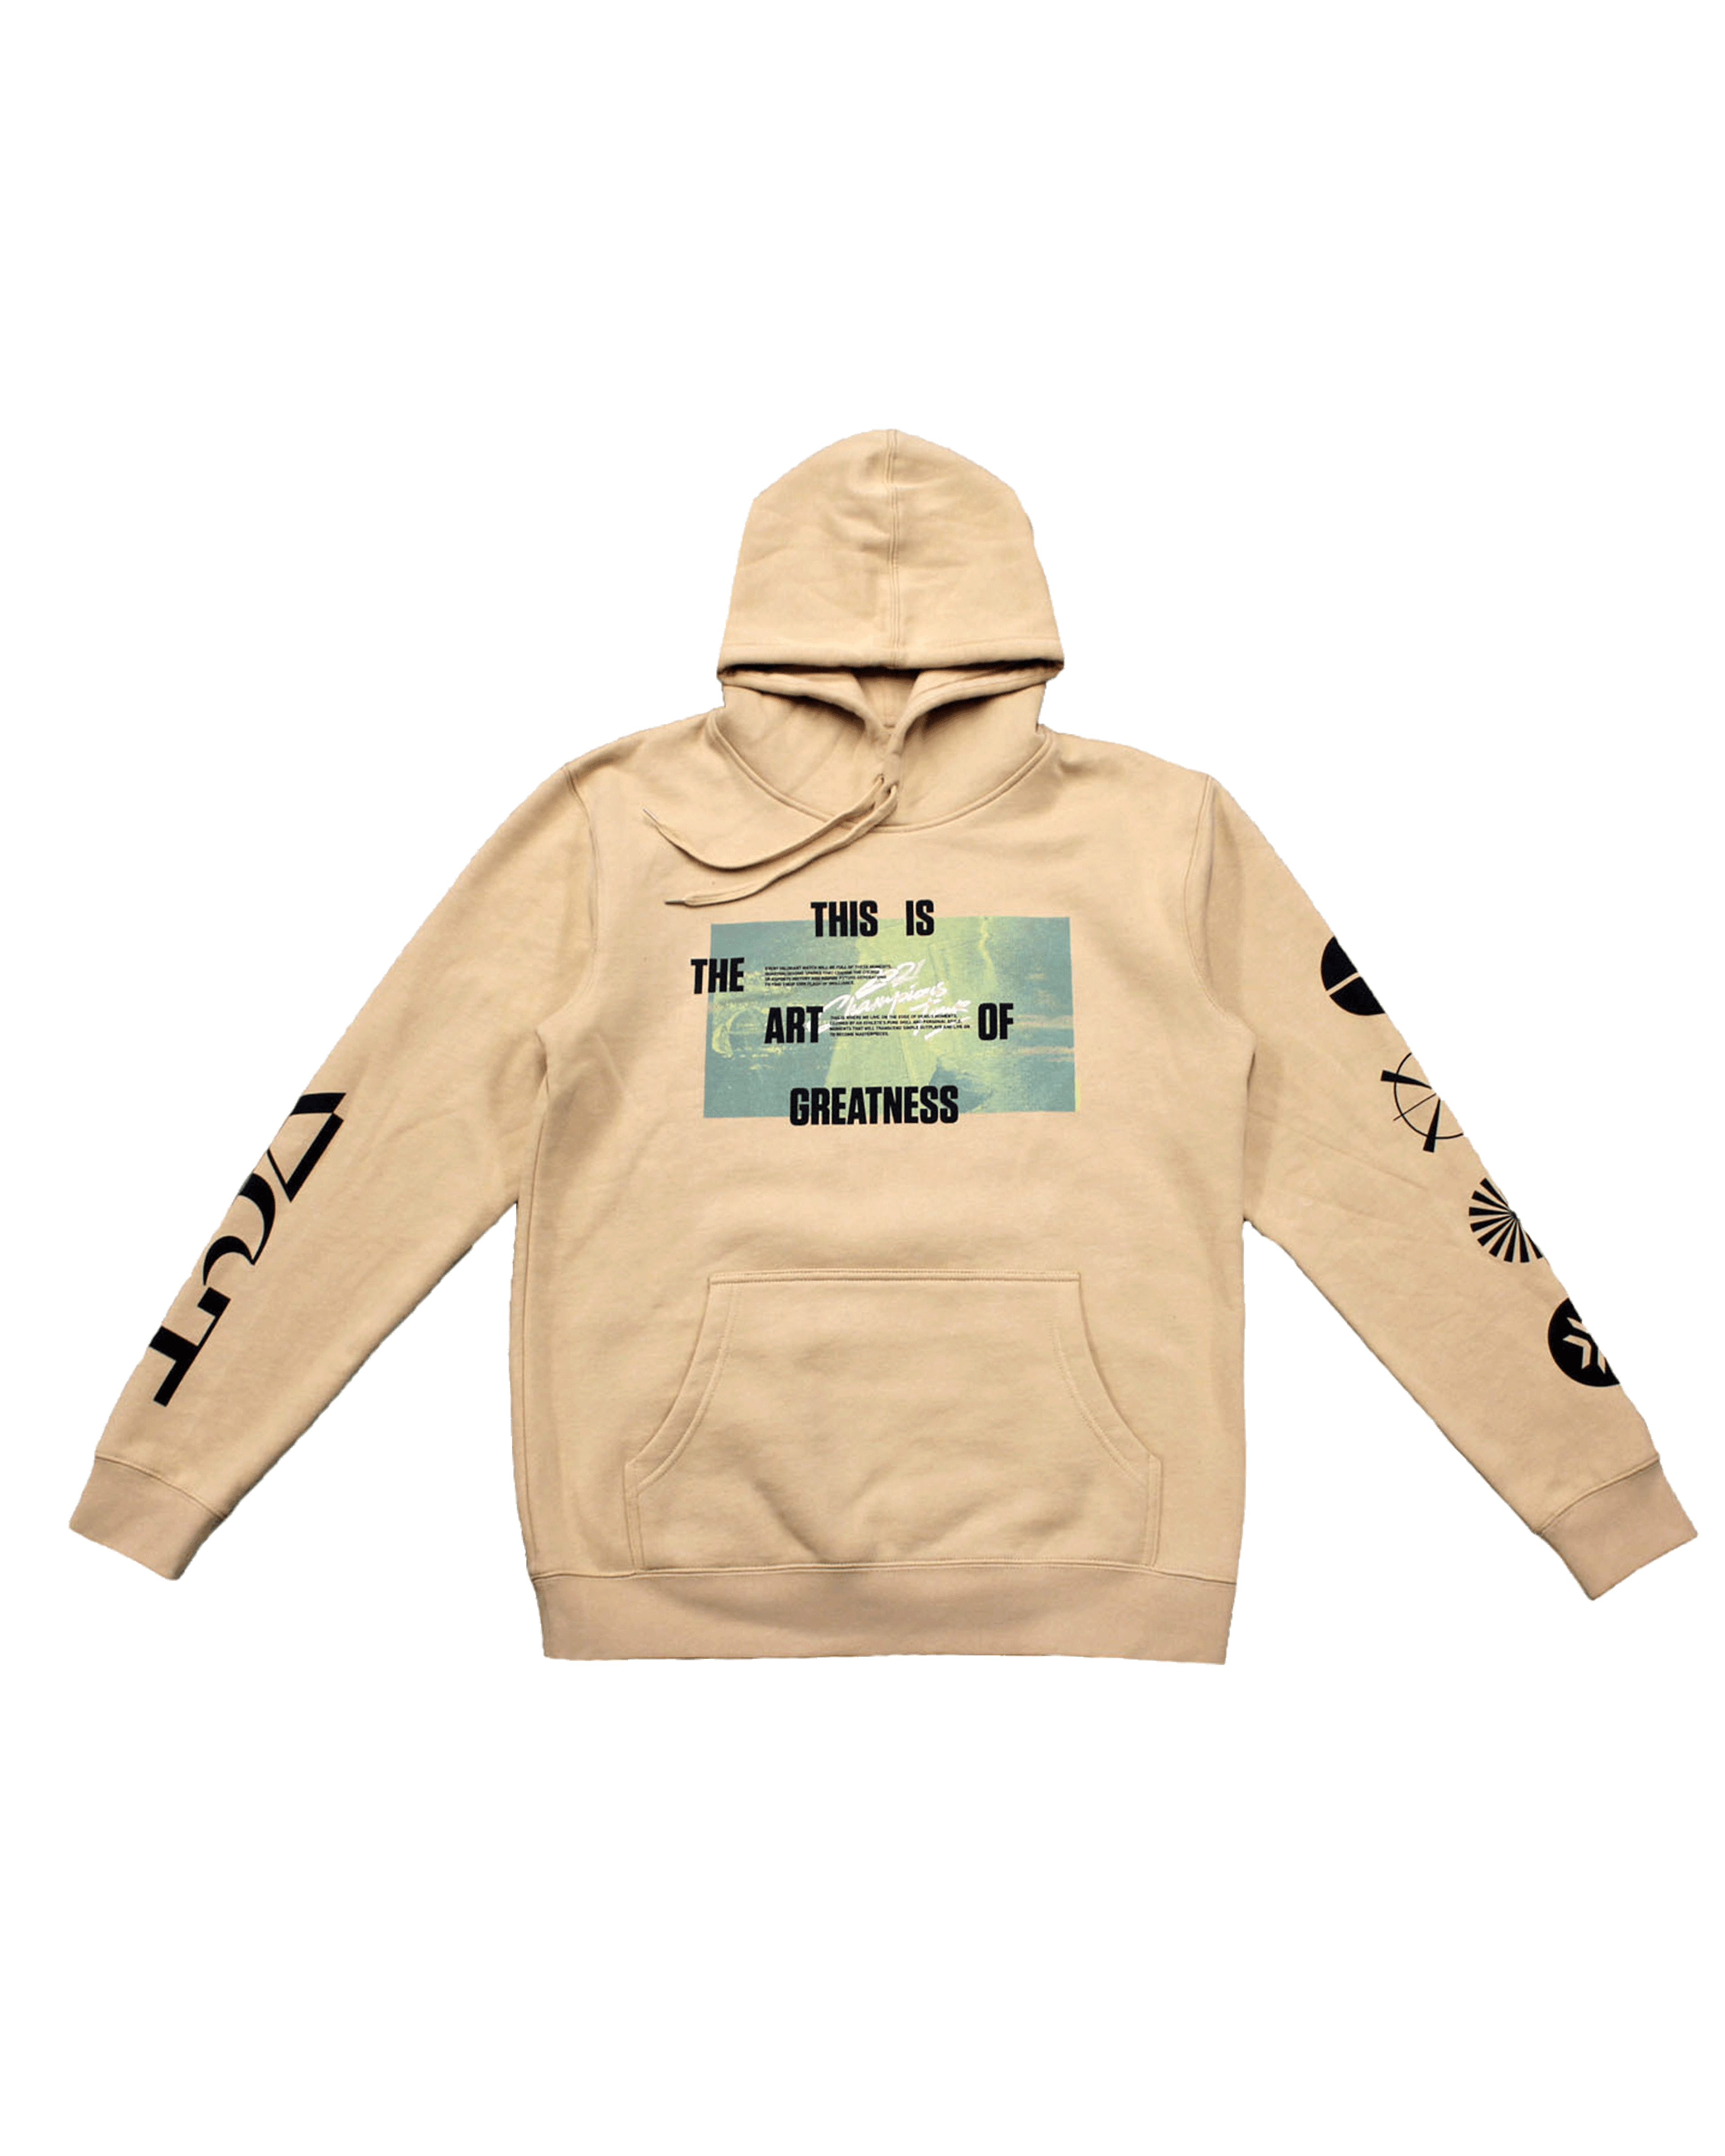 Champions 2021 "Art of Greatness" Hoodie (Unisex) // Gold Edition